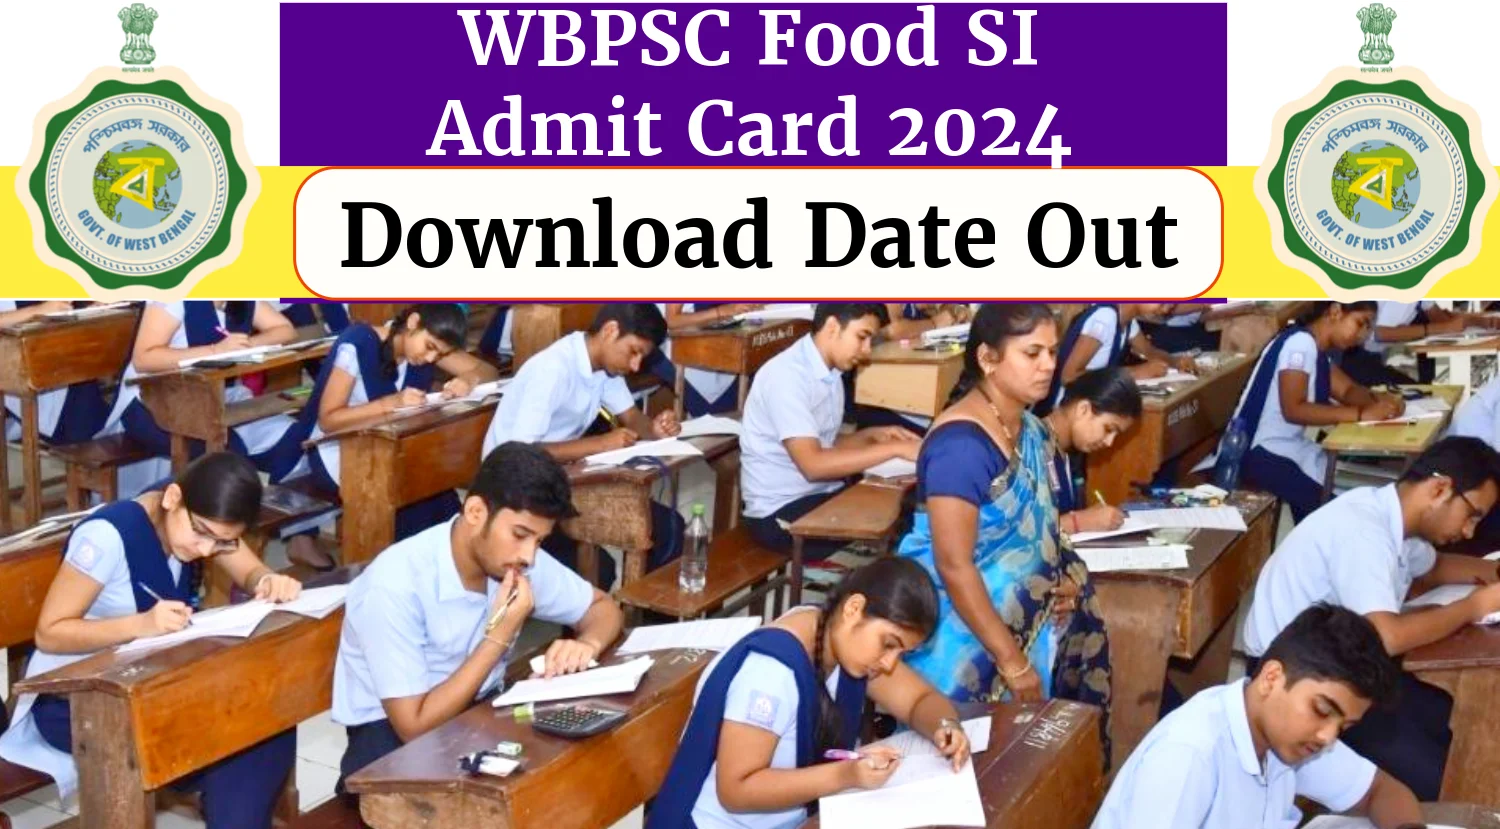 WBPSC Food SI Admit Card 2024 Download Date Out, Check Food SI Important Dates Now